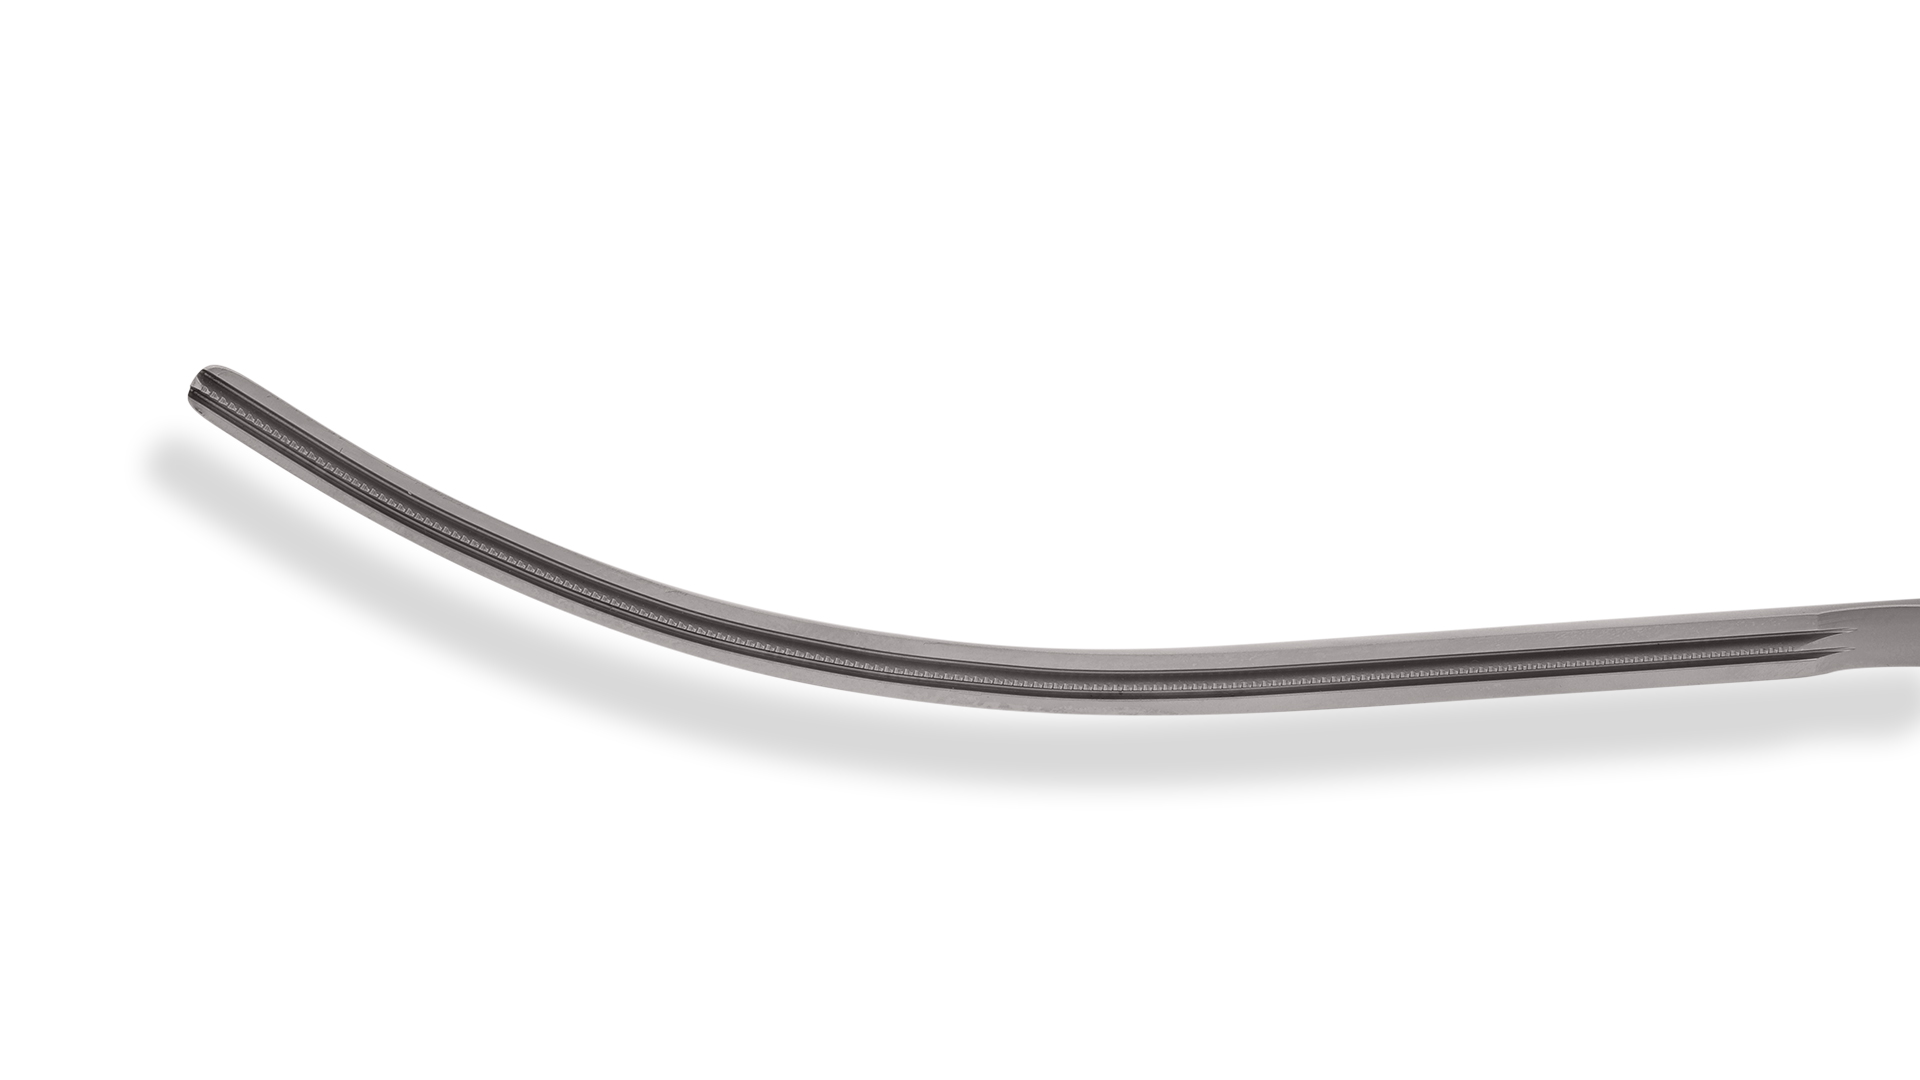 Thoracoscopic DeBakey Clamp - 110mm Curved 1x2 DeBakey Atraumatic Tapered jaws